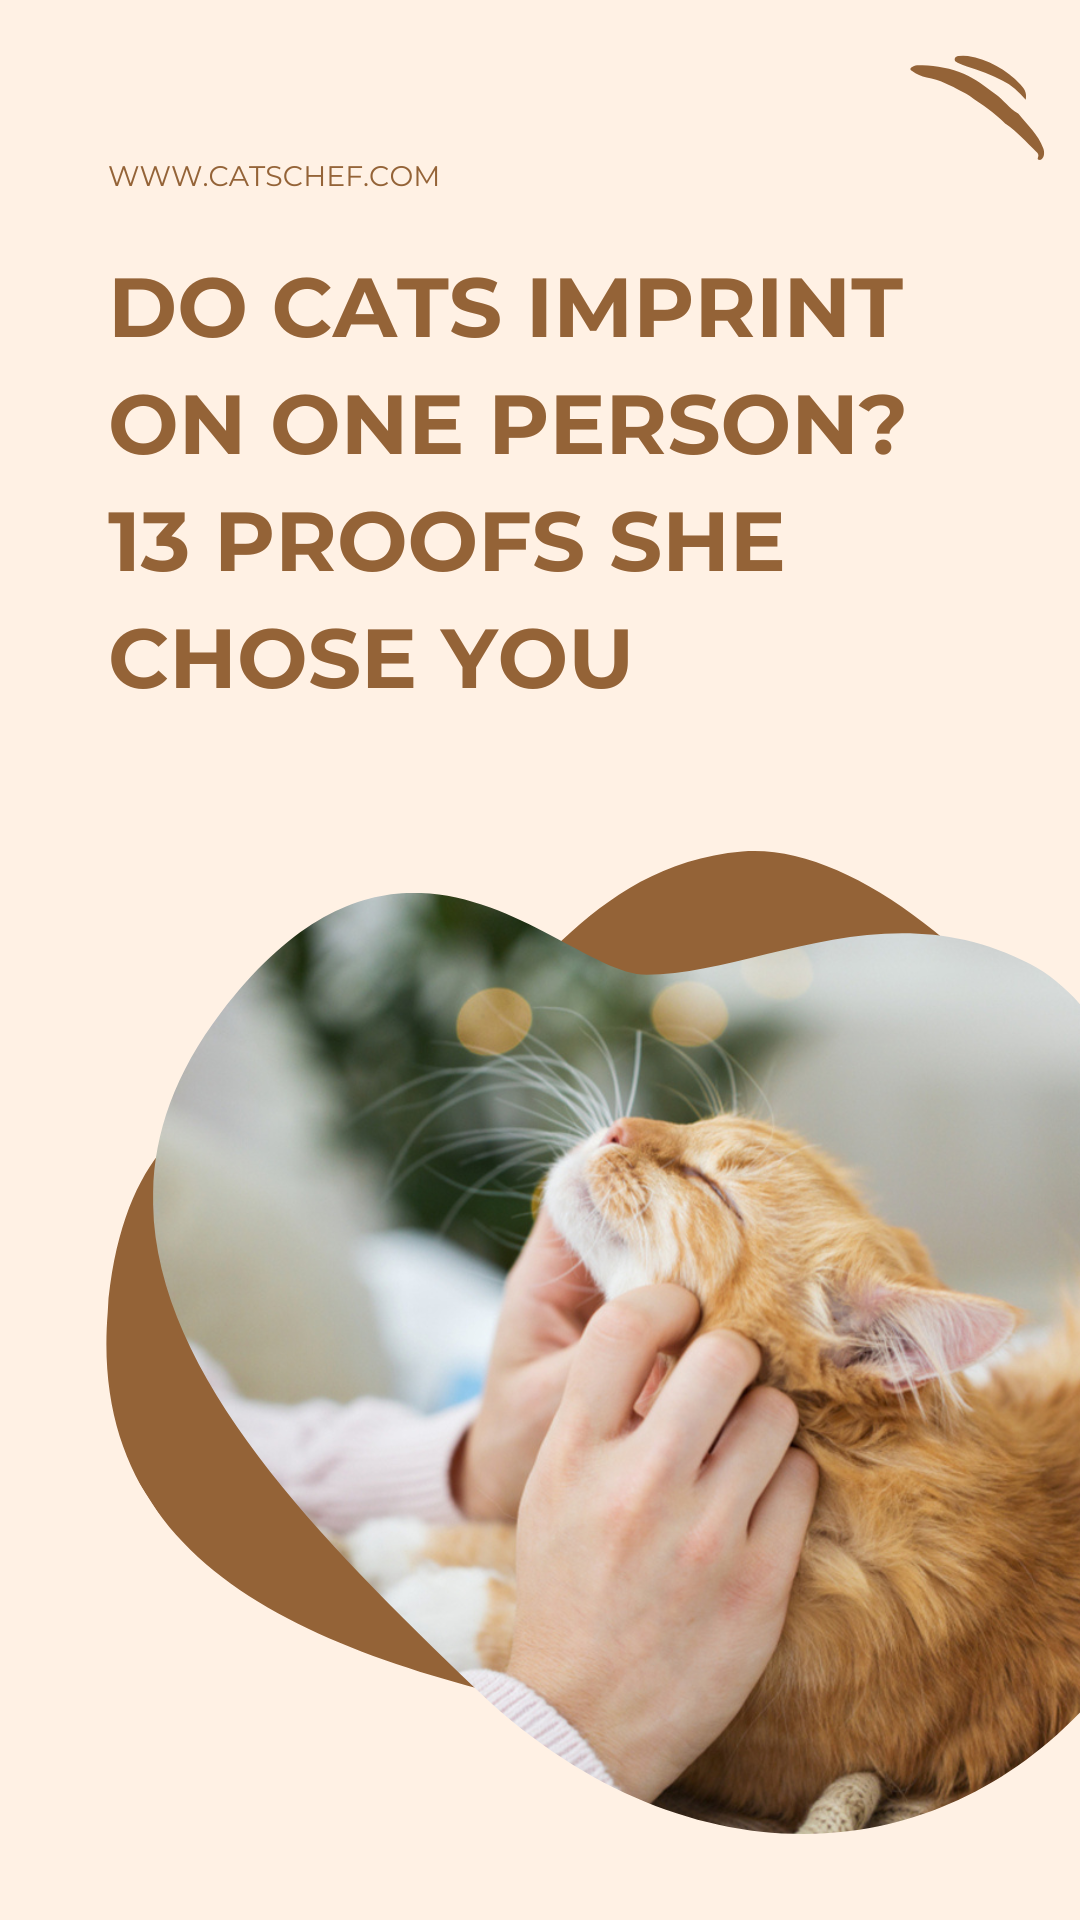 Do Cats Imprint On One Person? 13 Proofs She Chose You